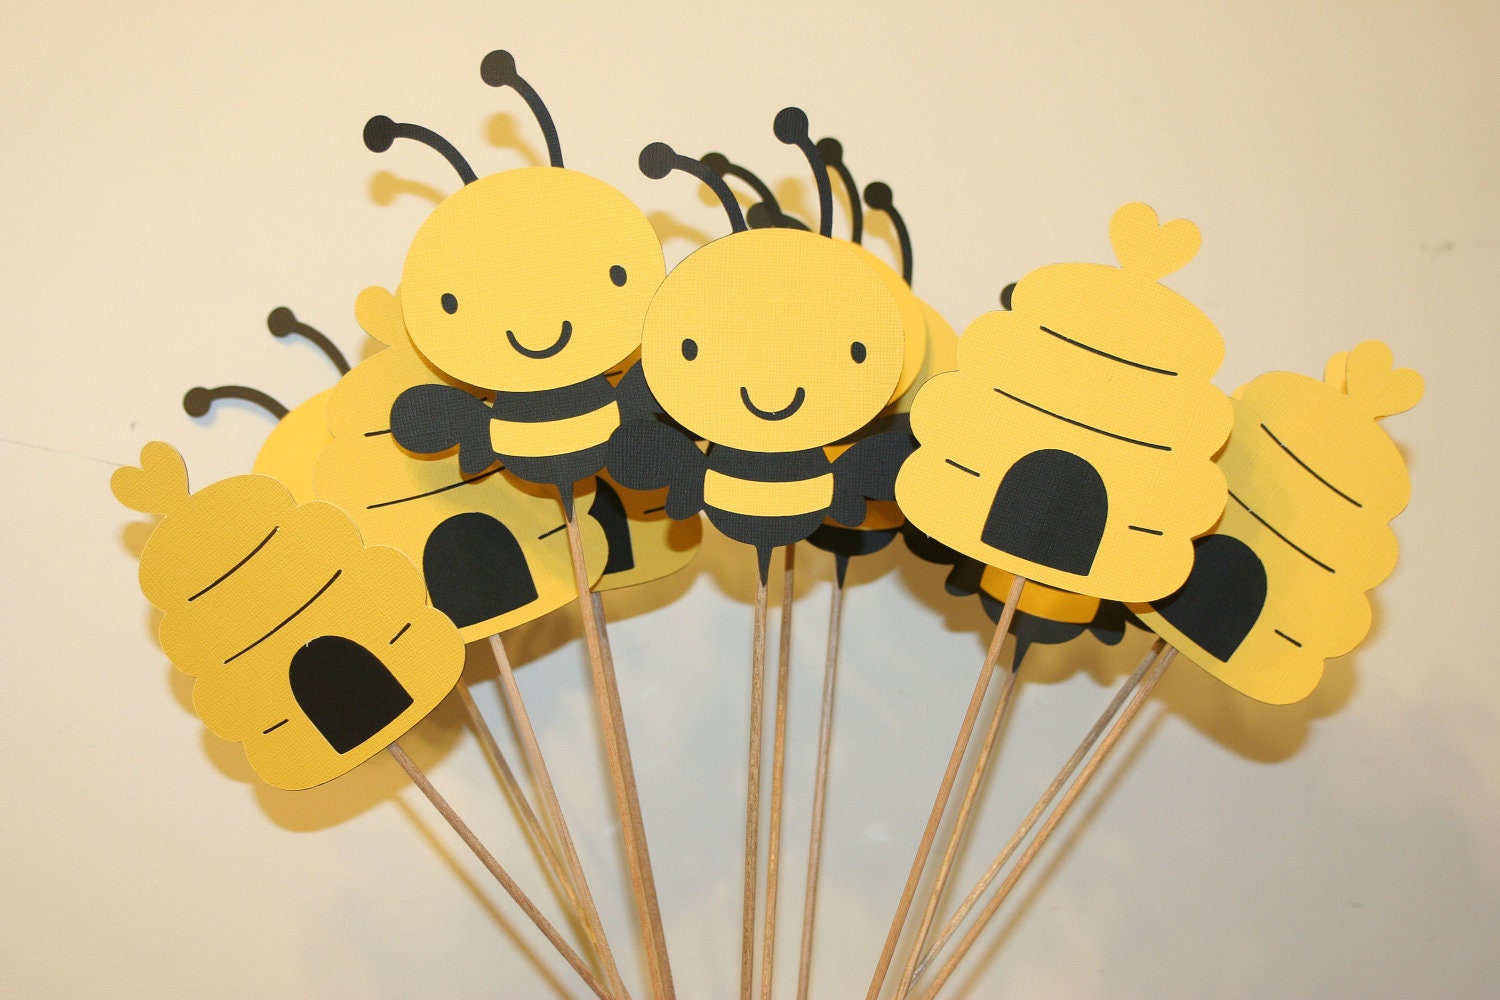 Set of 12 Bumble Bee Table Decorations, Centerpieces, Great for